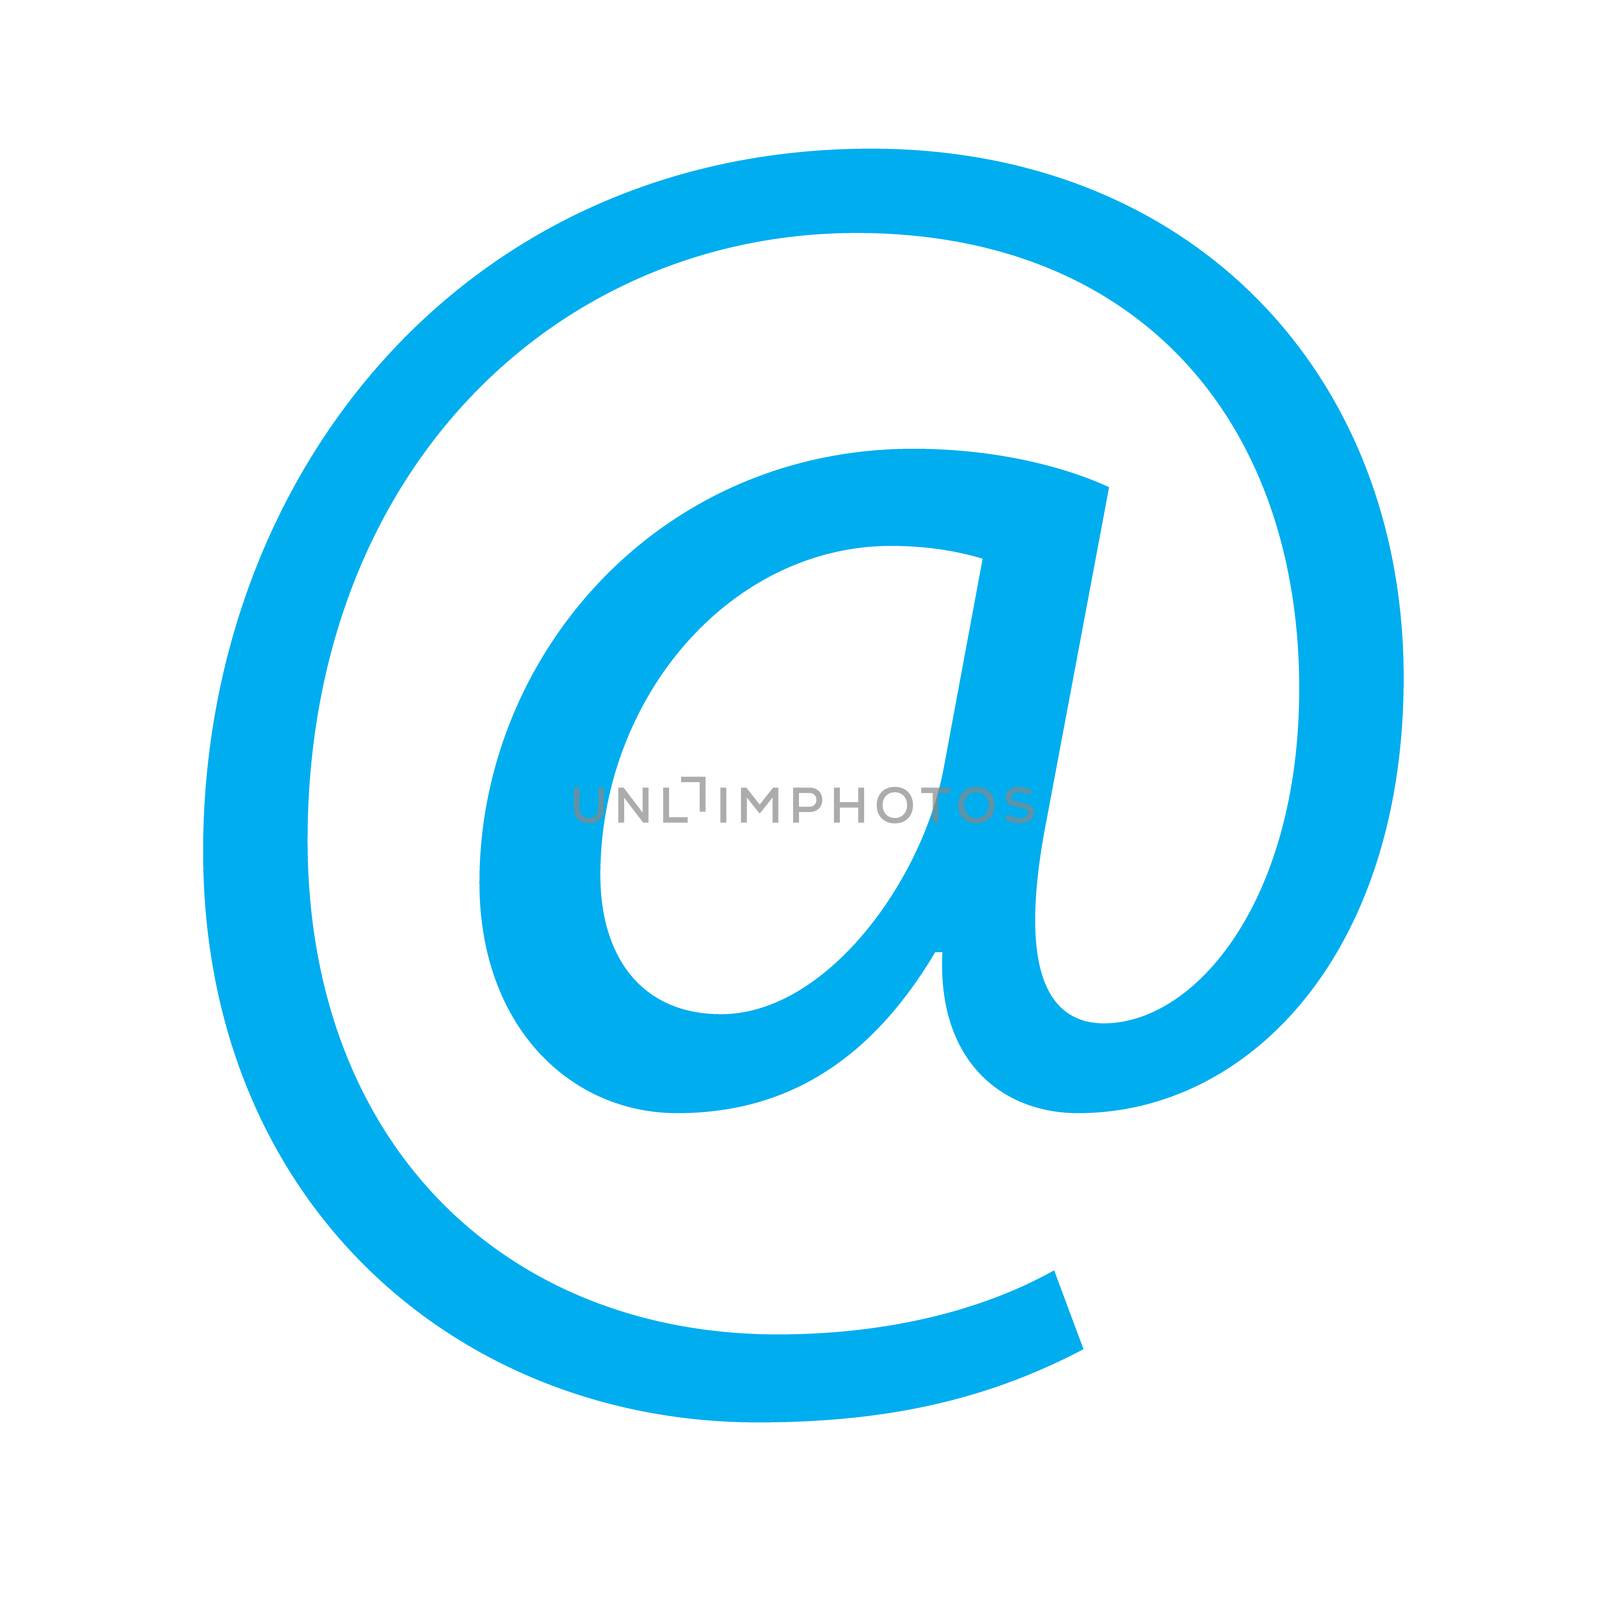 email web icon flat design style. email web sign. email icon for by suthee